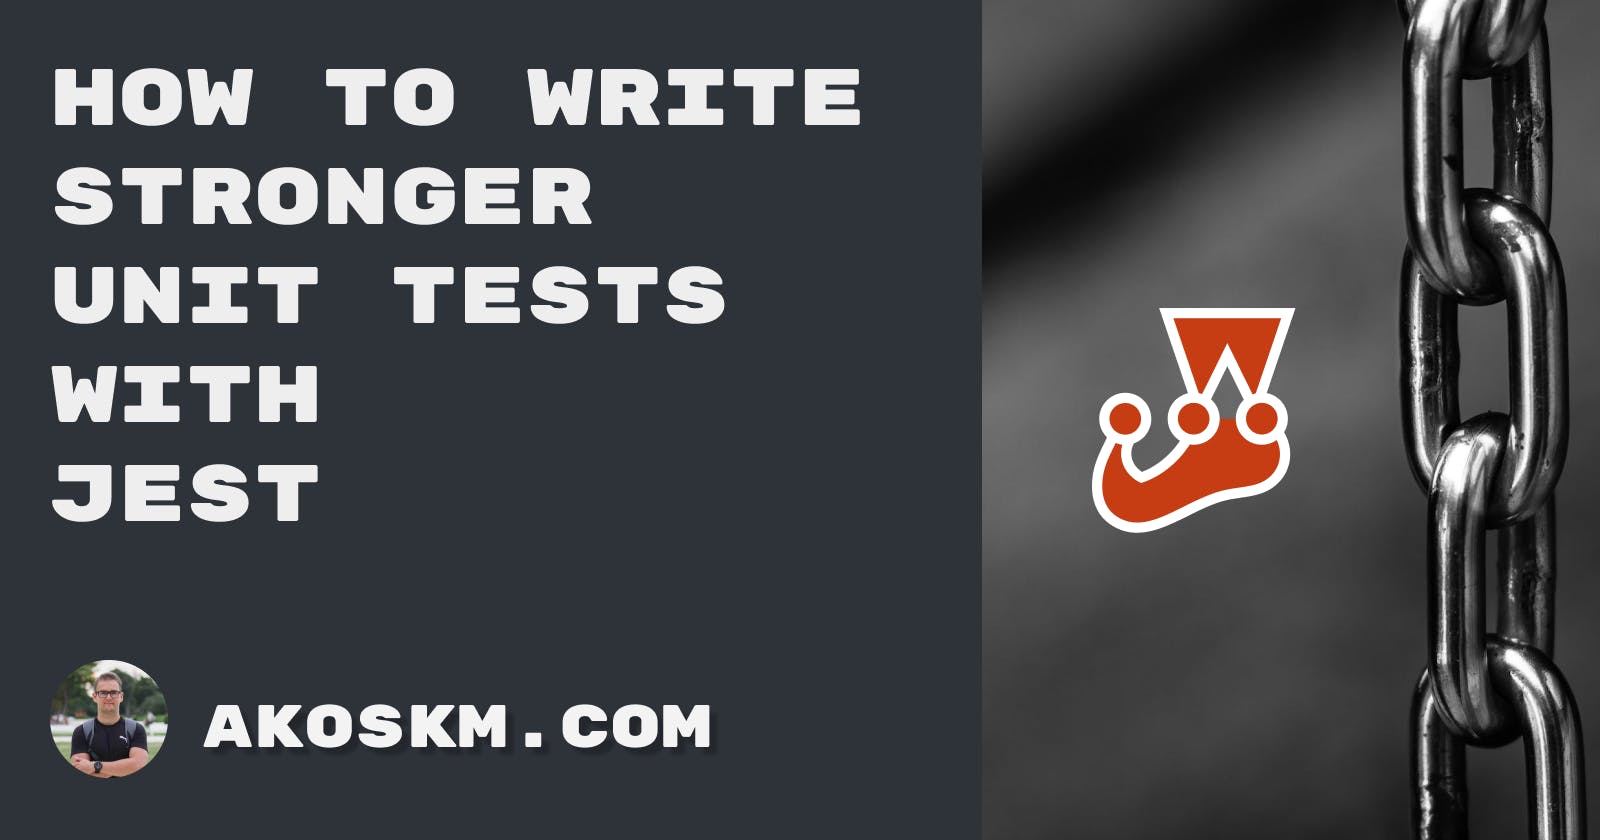 How to Write Stronger Unit Tests with Jest